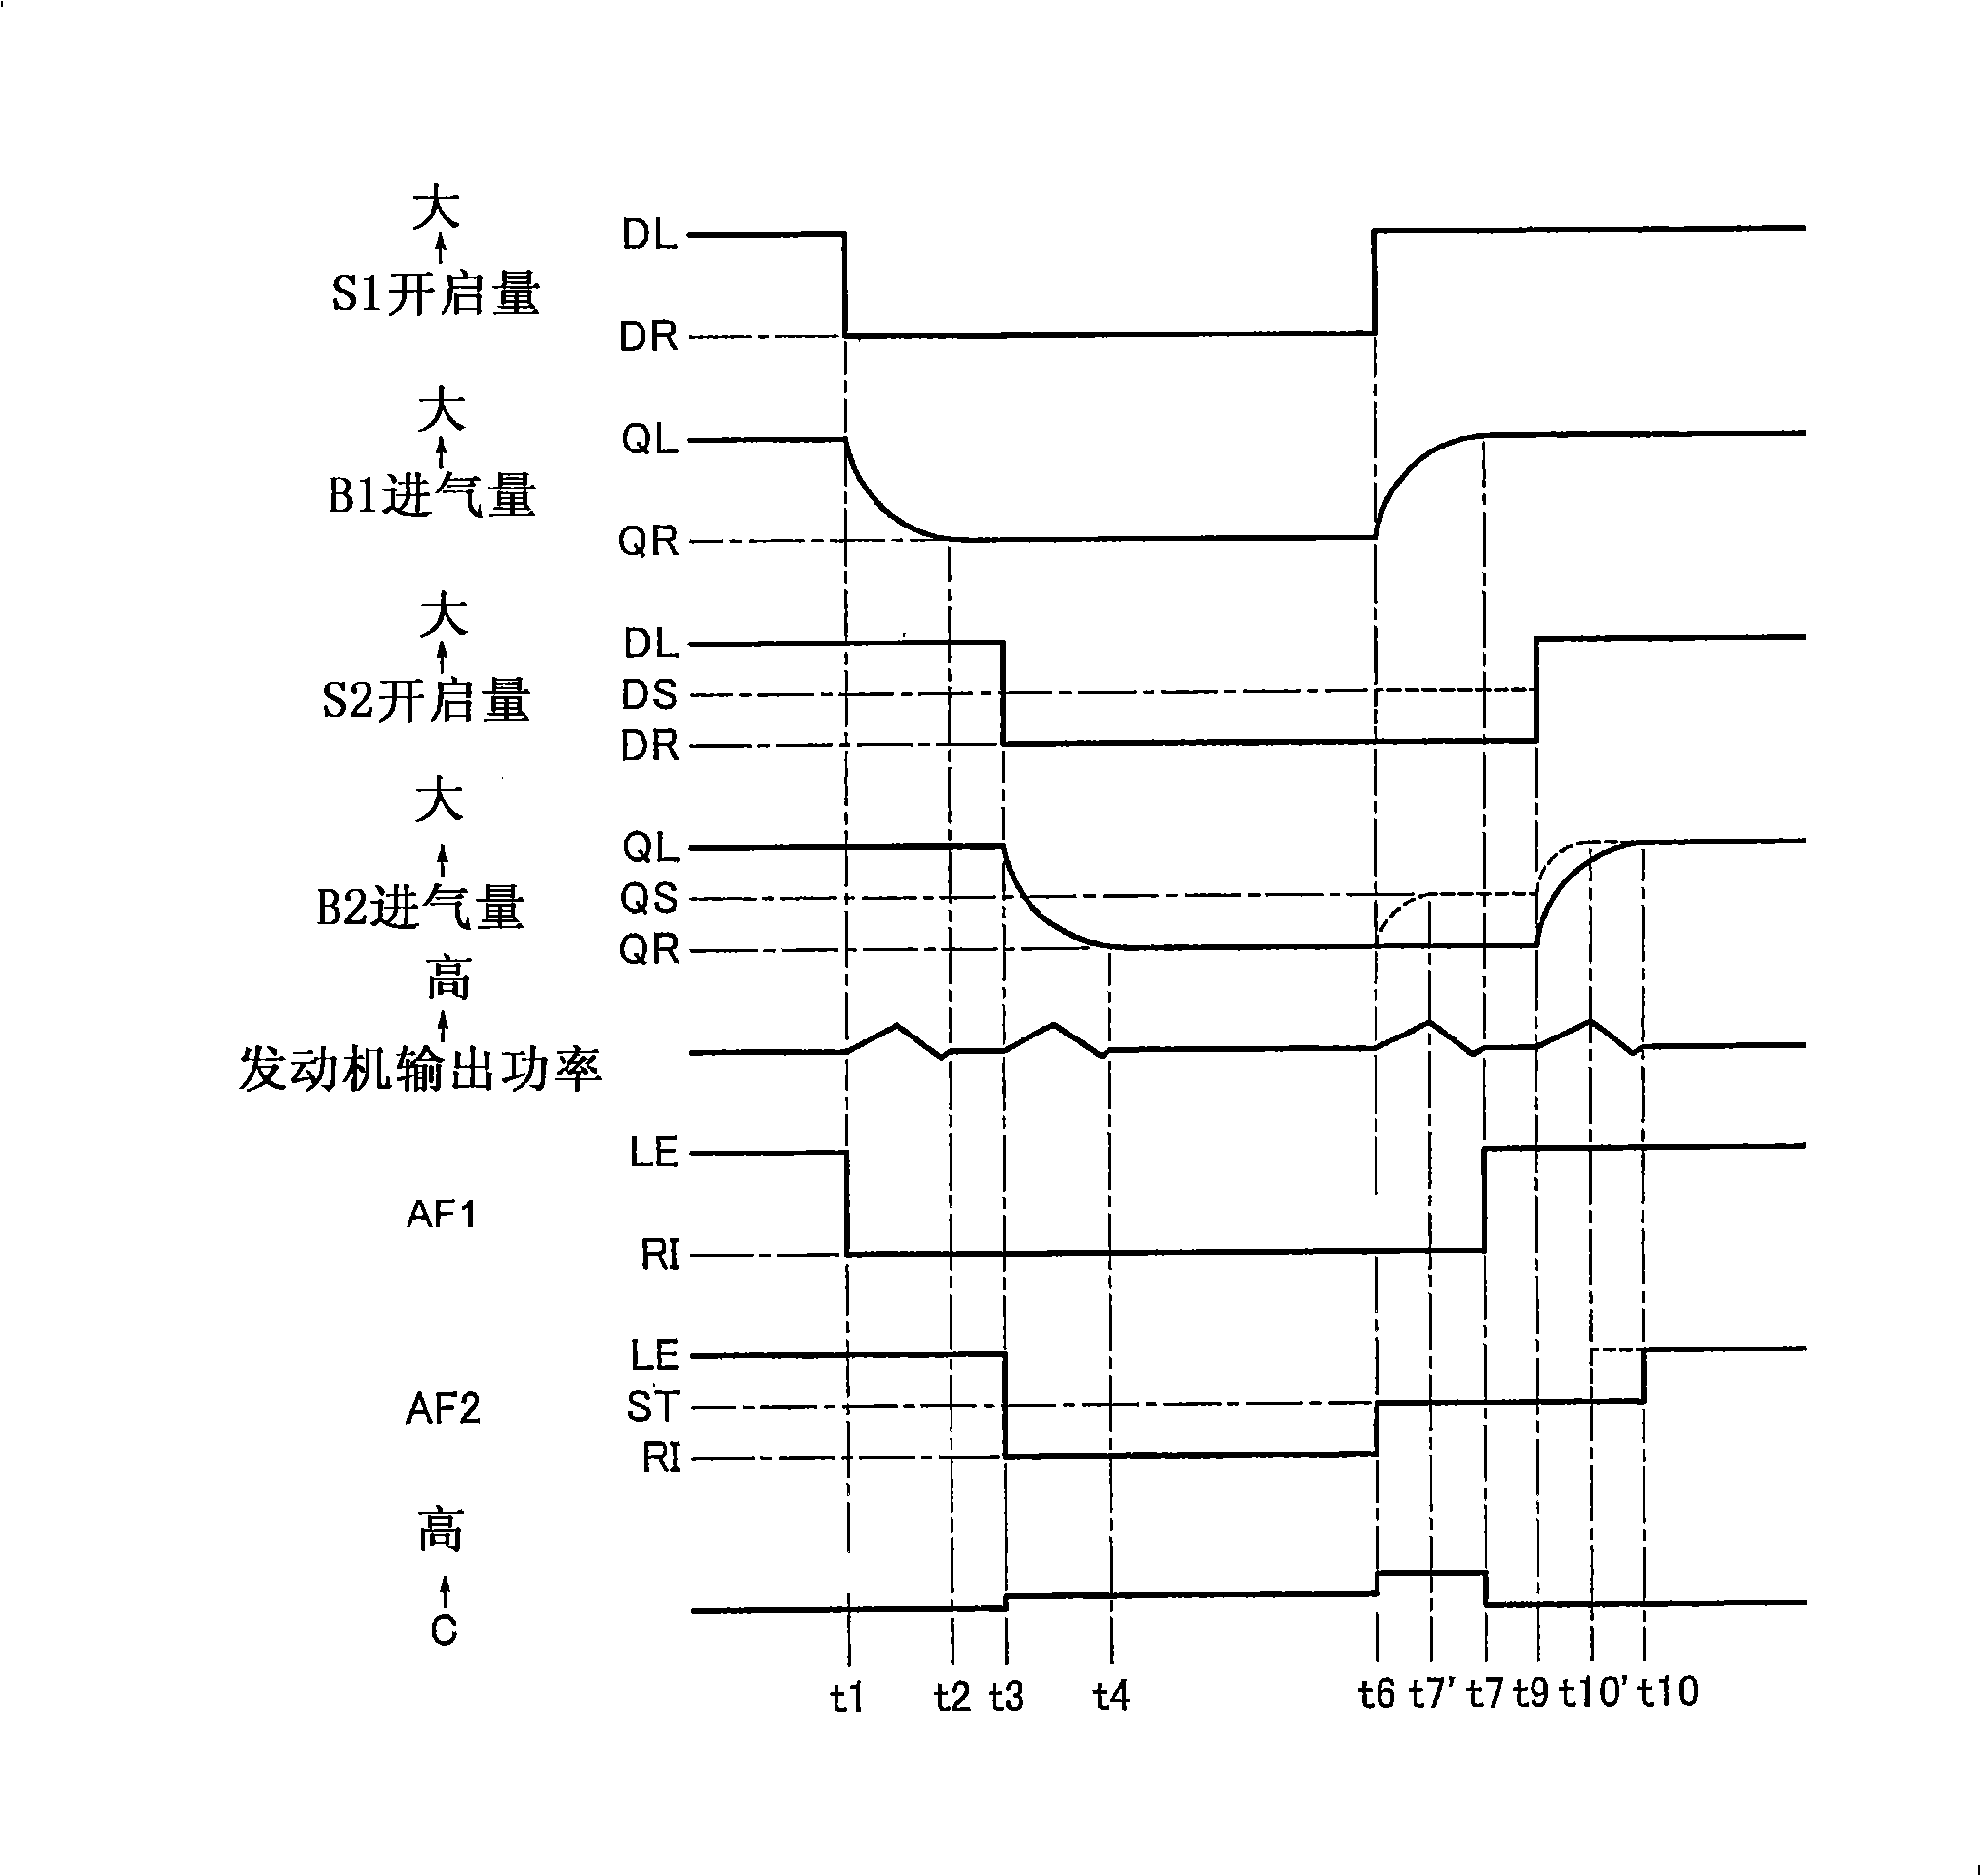 Throttle valve control apparatus of an internal combustion engine